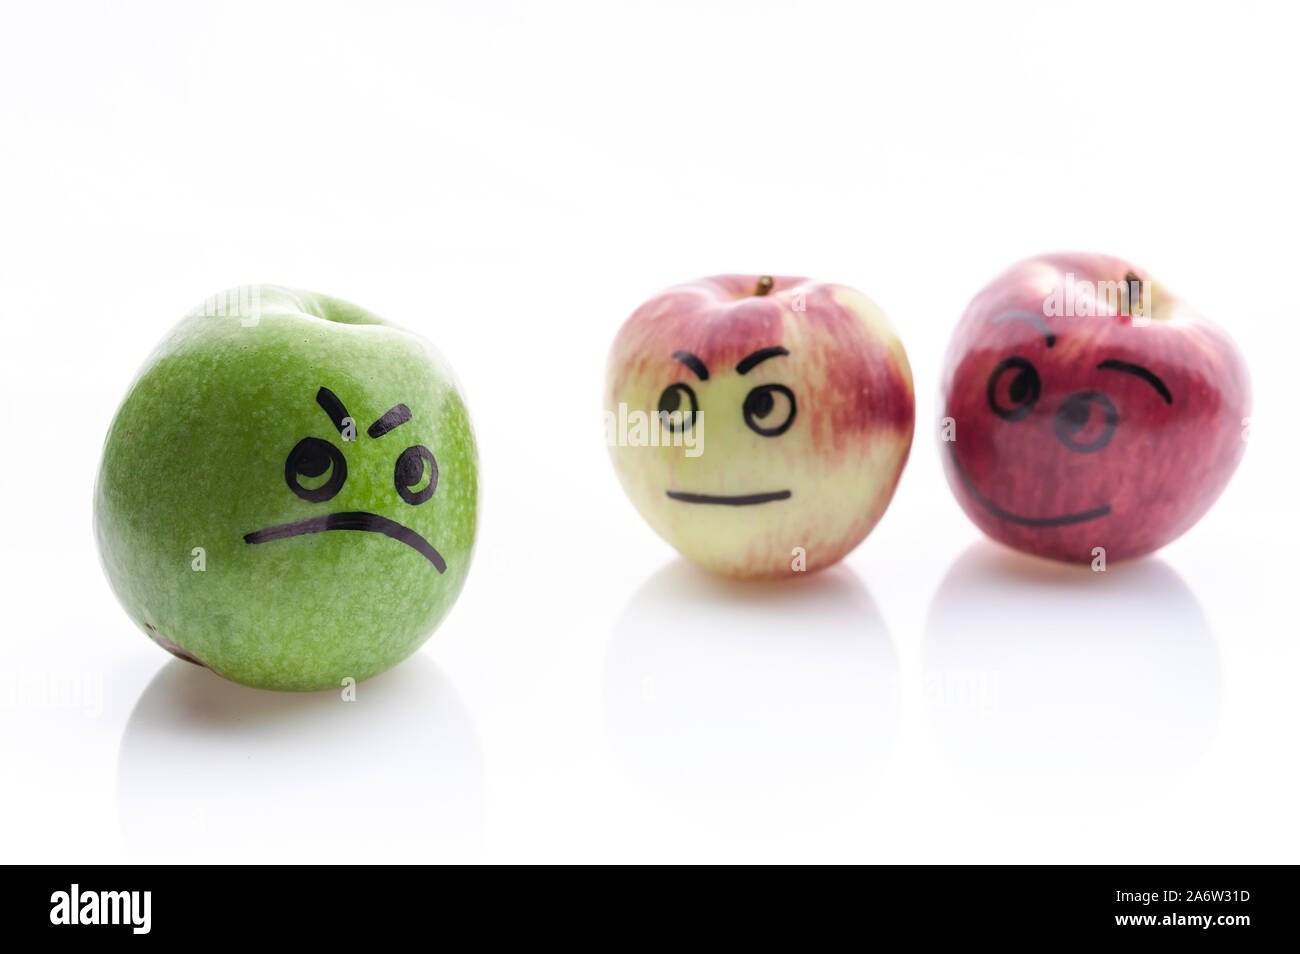 Jolly and sad funny apples. Green and red apples on a white background. Stock Photo